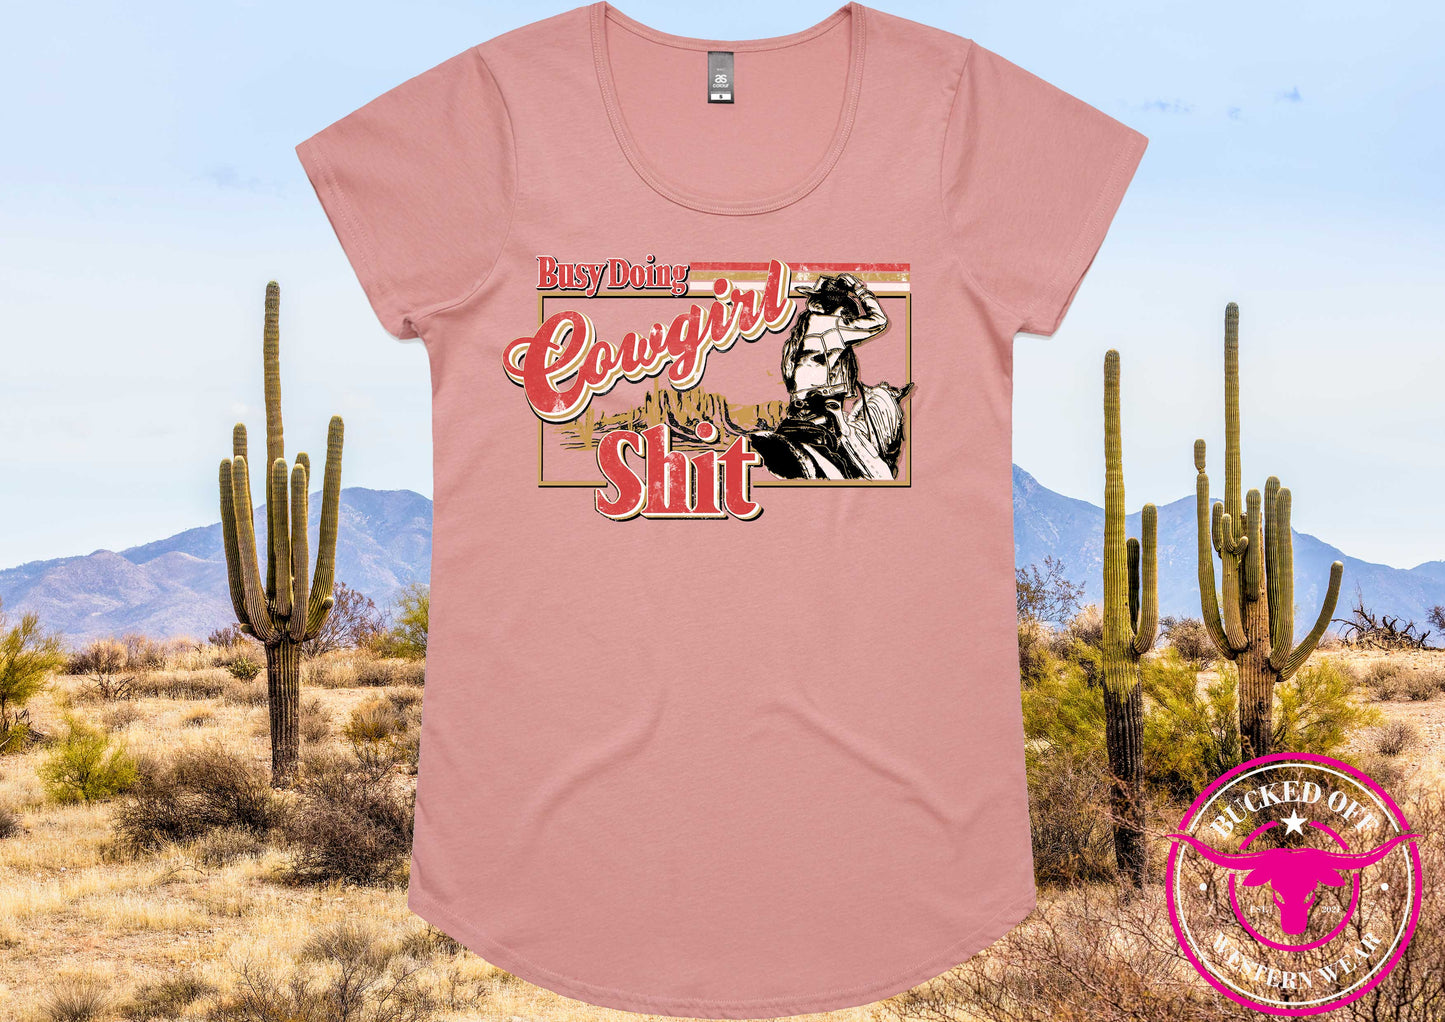 Busy doin' Cowgirl sh*t Tee's